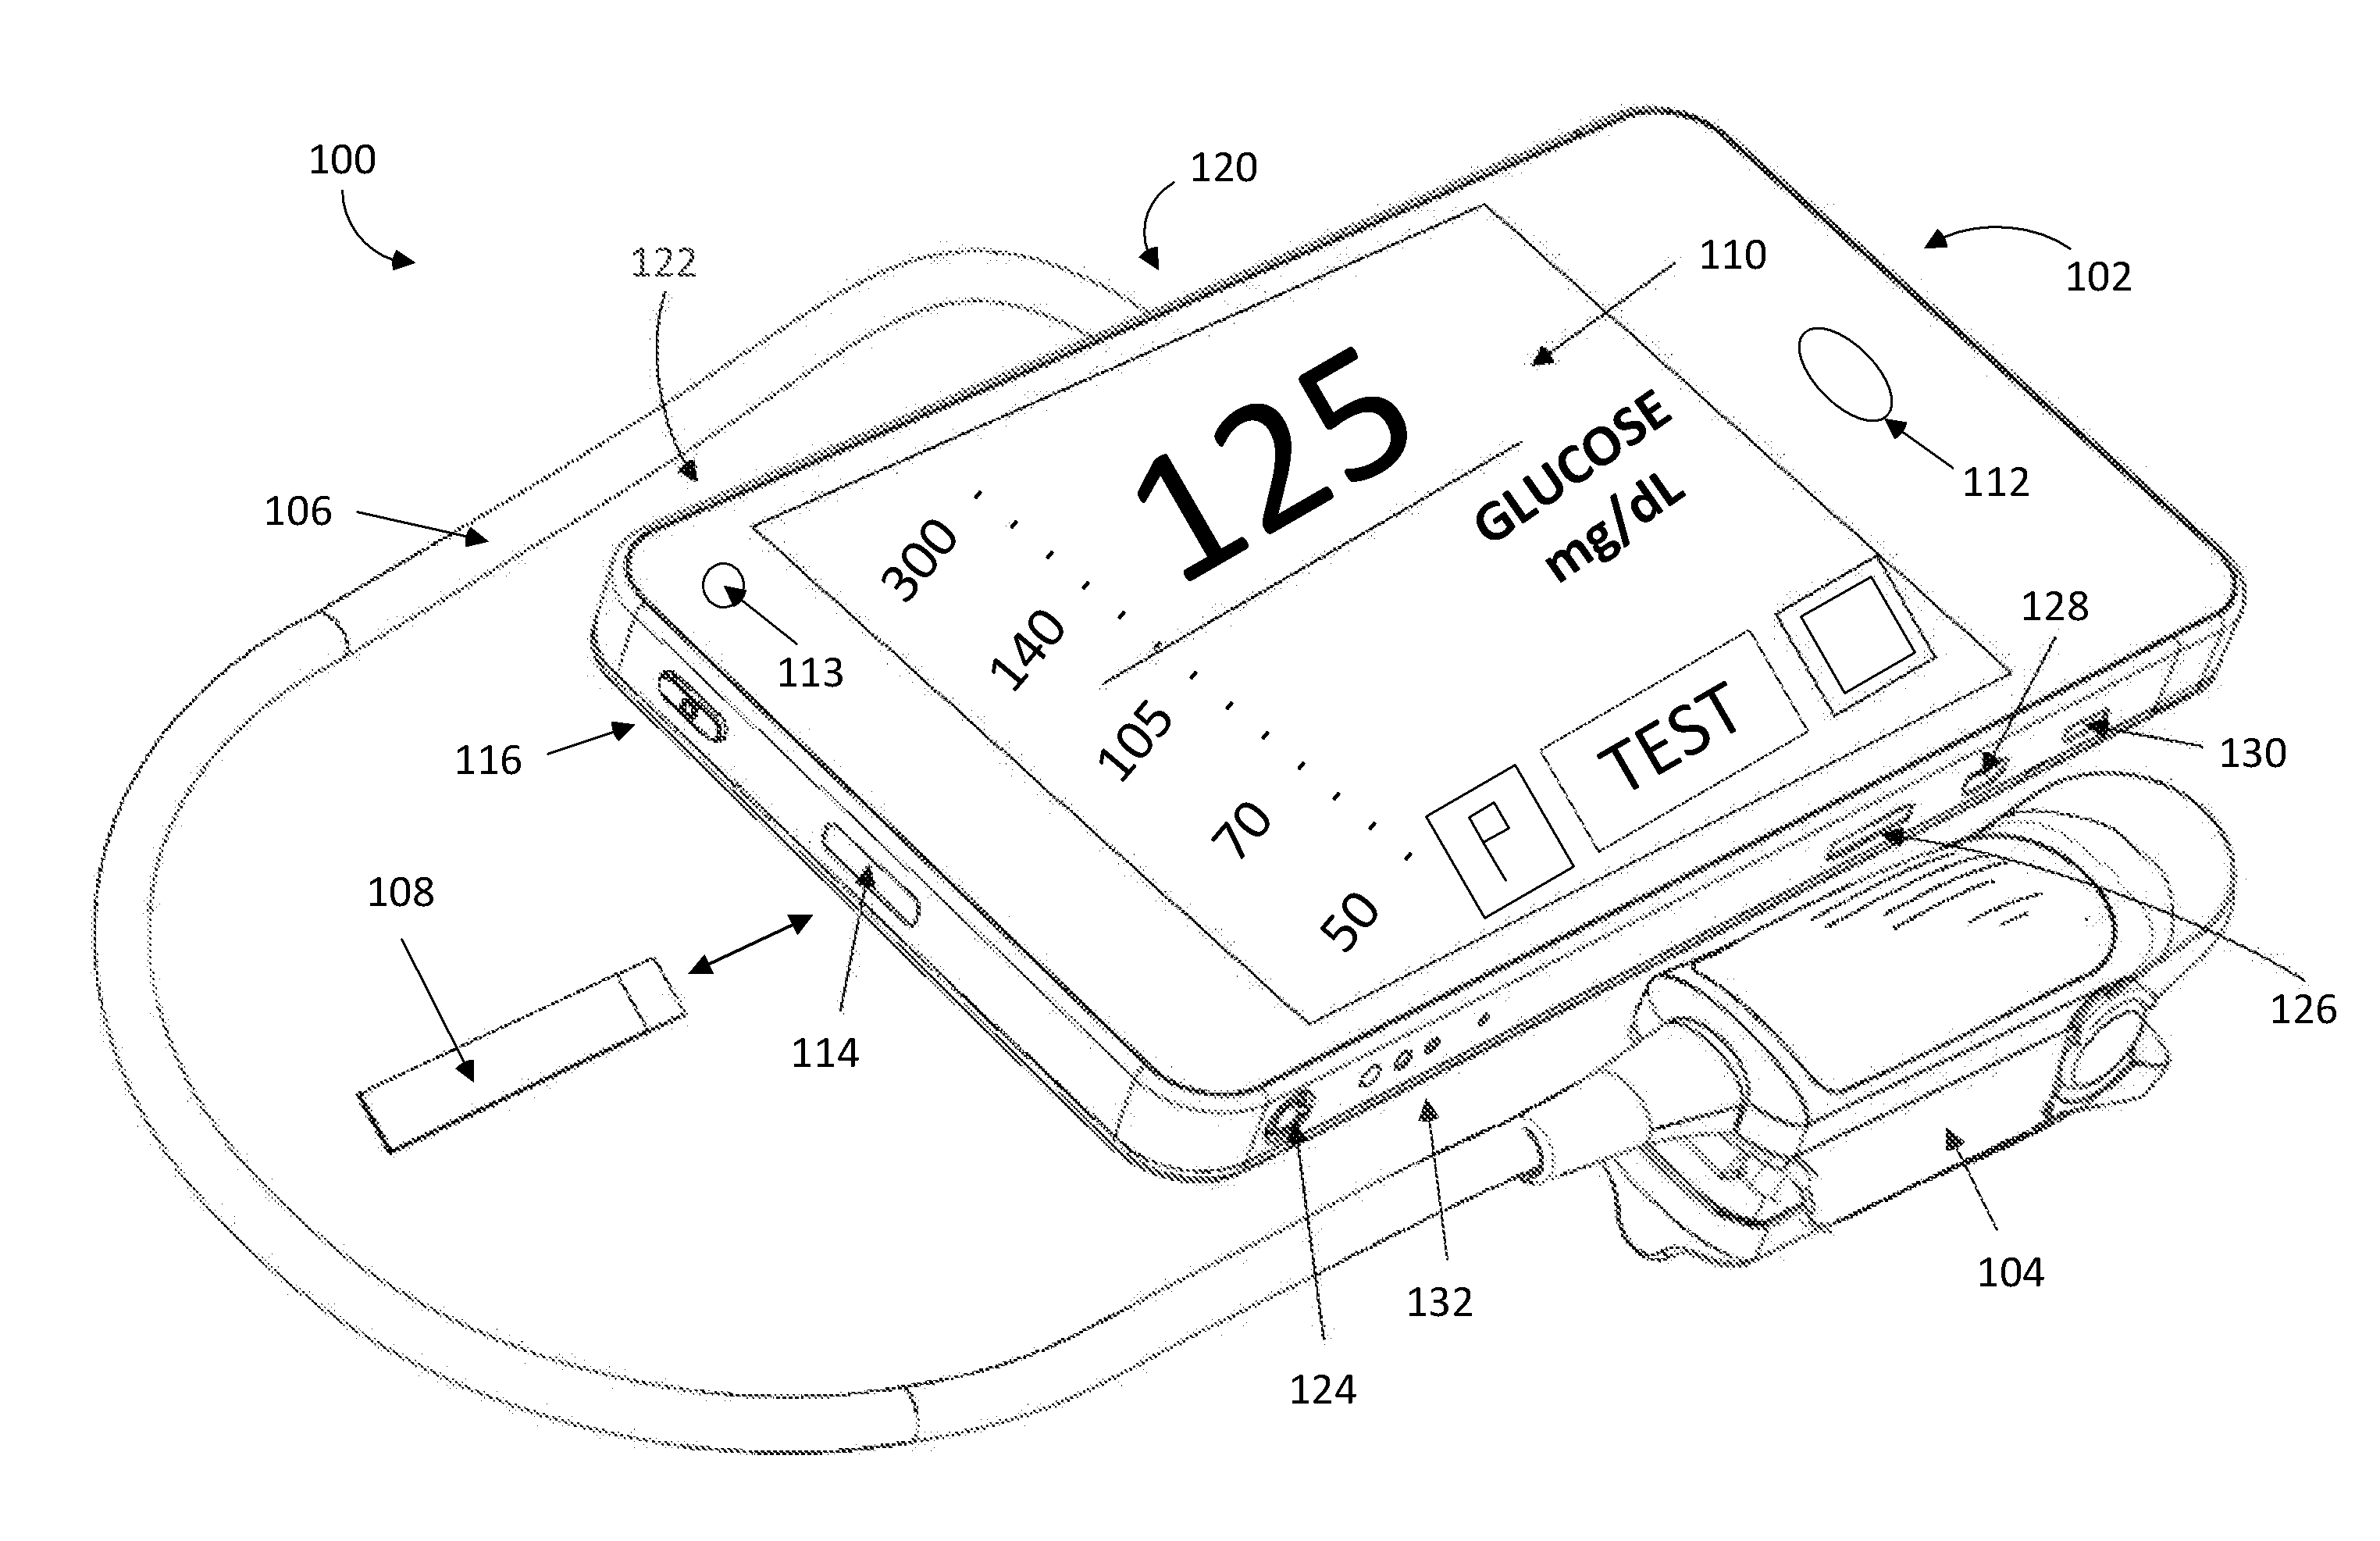 Handheld processing device including medical applications for minimally and non invasive glucose measurements